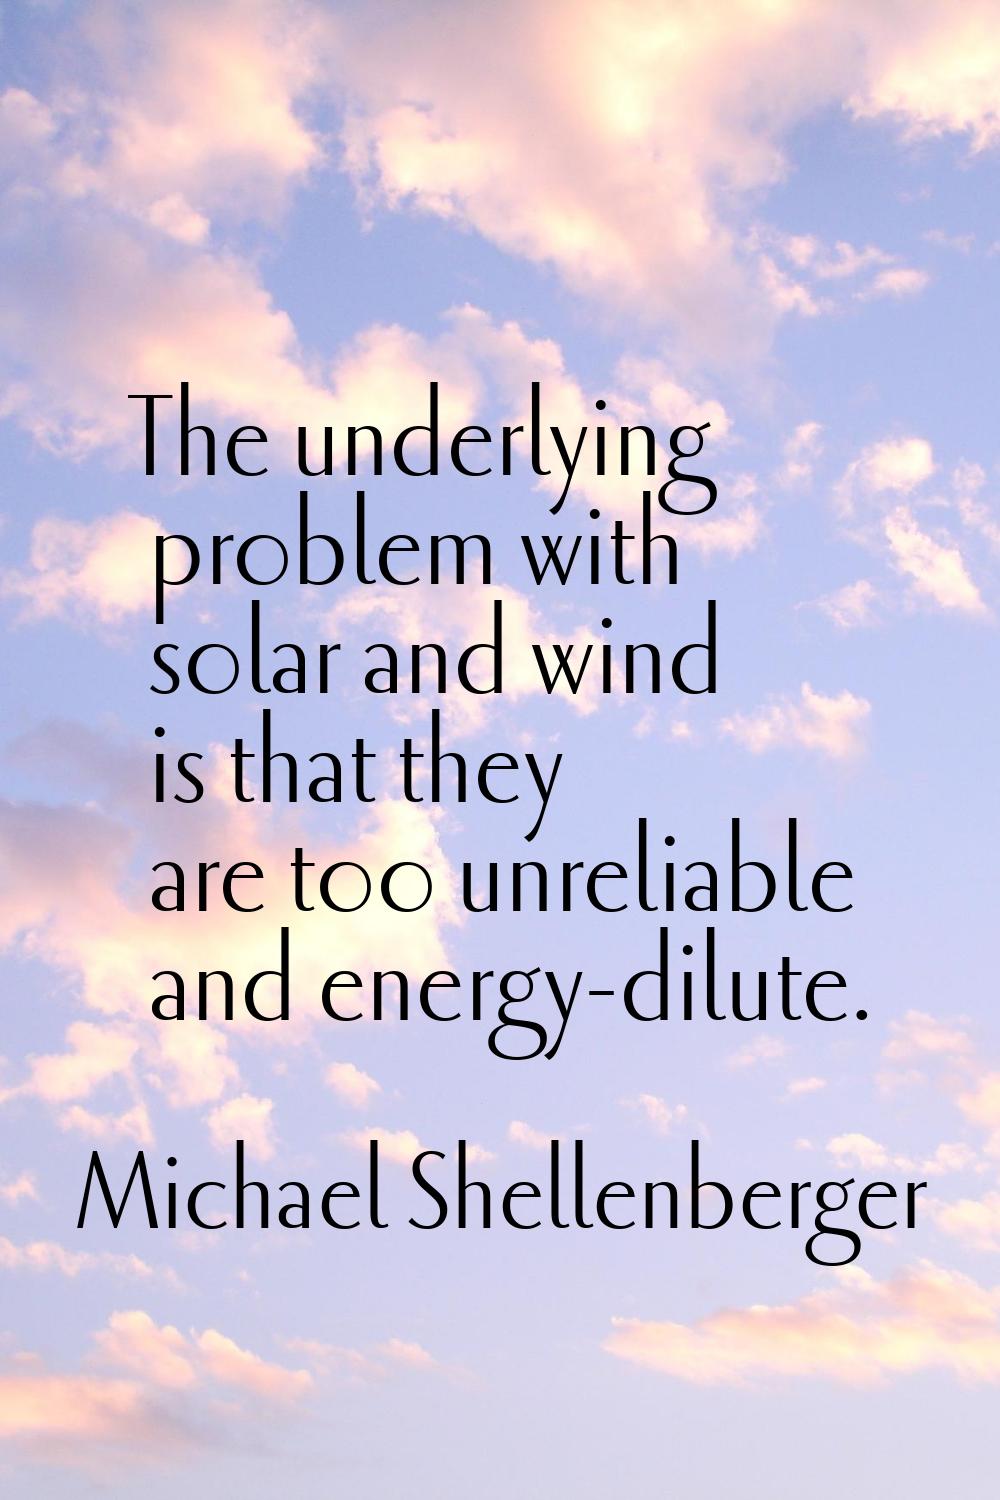 The underlying problem with solar and wind is that they are too unreliable and energy-dilute.